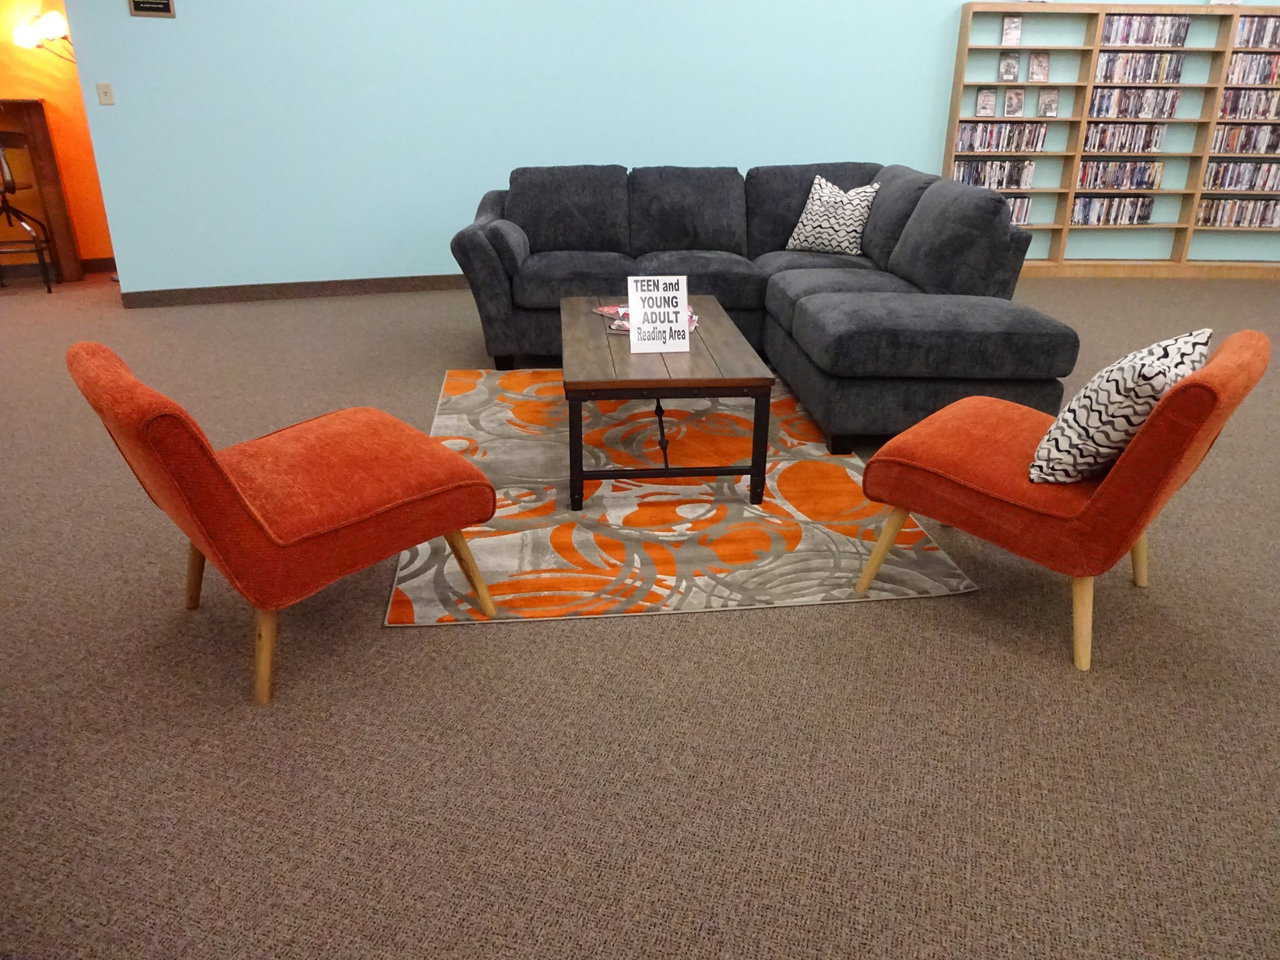 Kasson library teen and young adult reading area